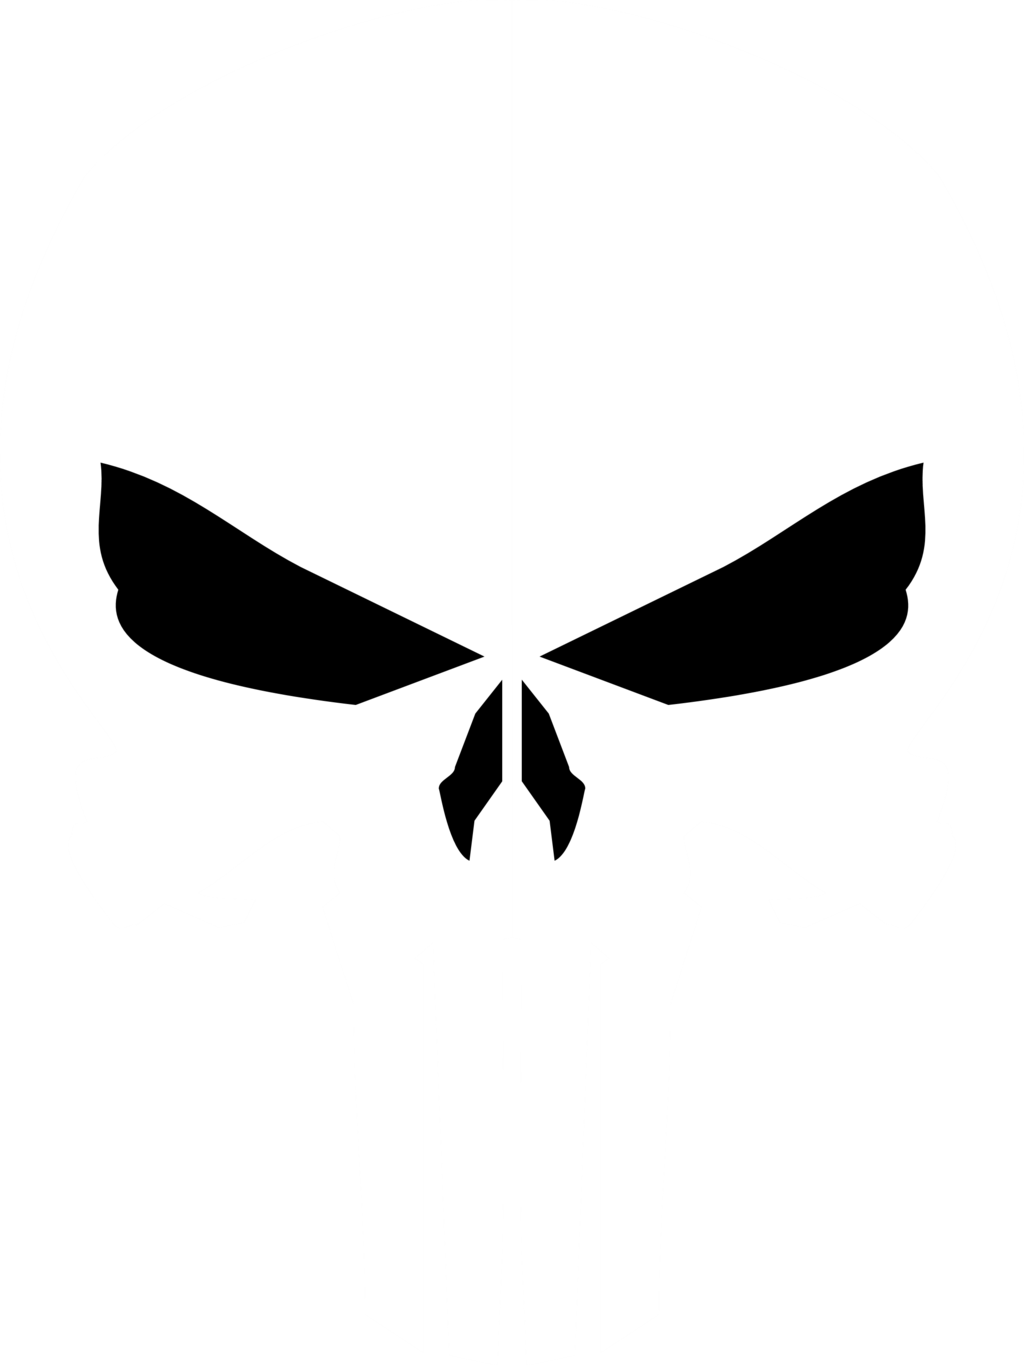 Clipart Skull Punisher Clipart Skull Punisher Transparent Free For Download On Webstockreview 2020